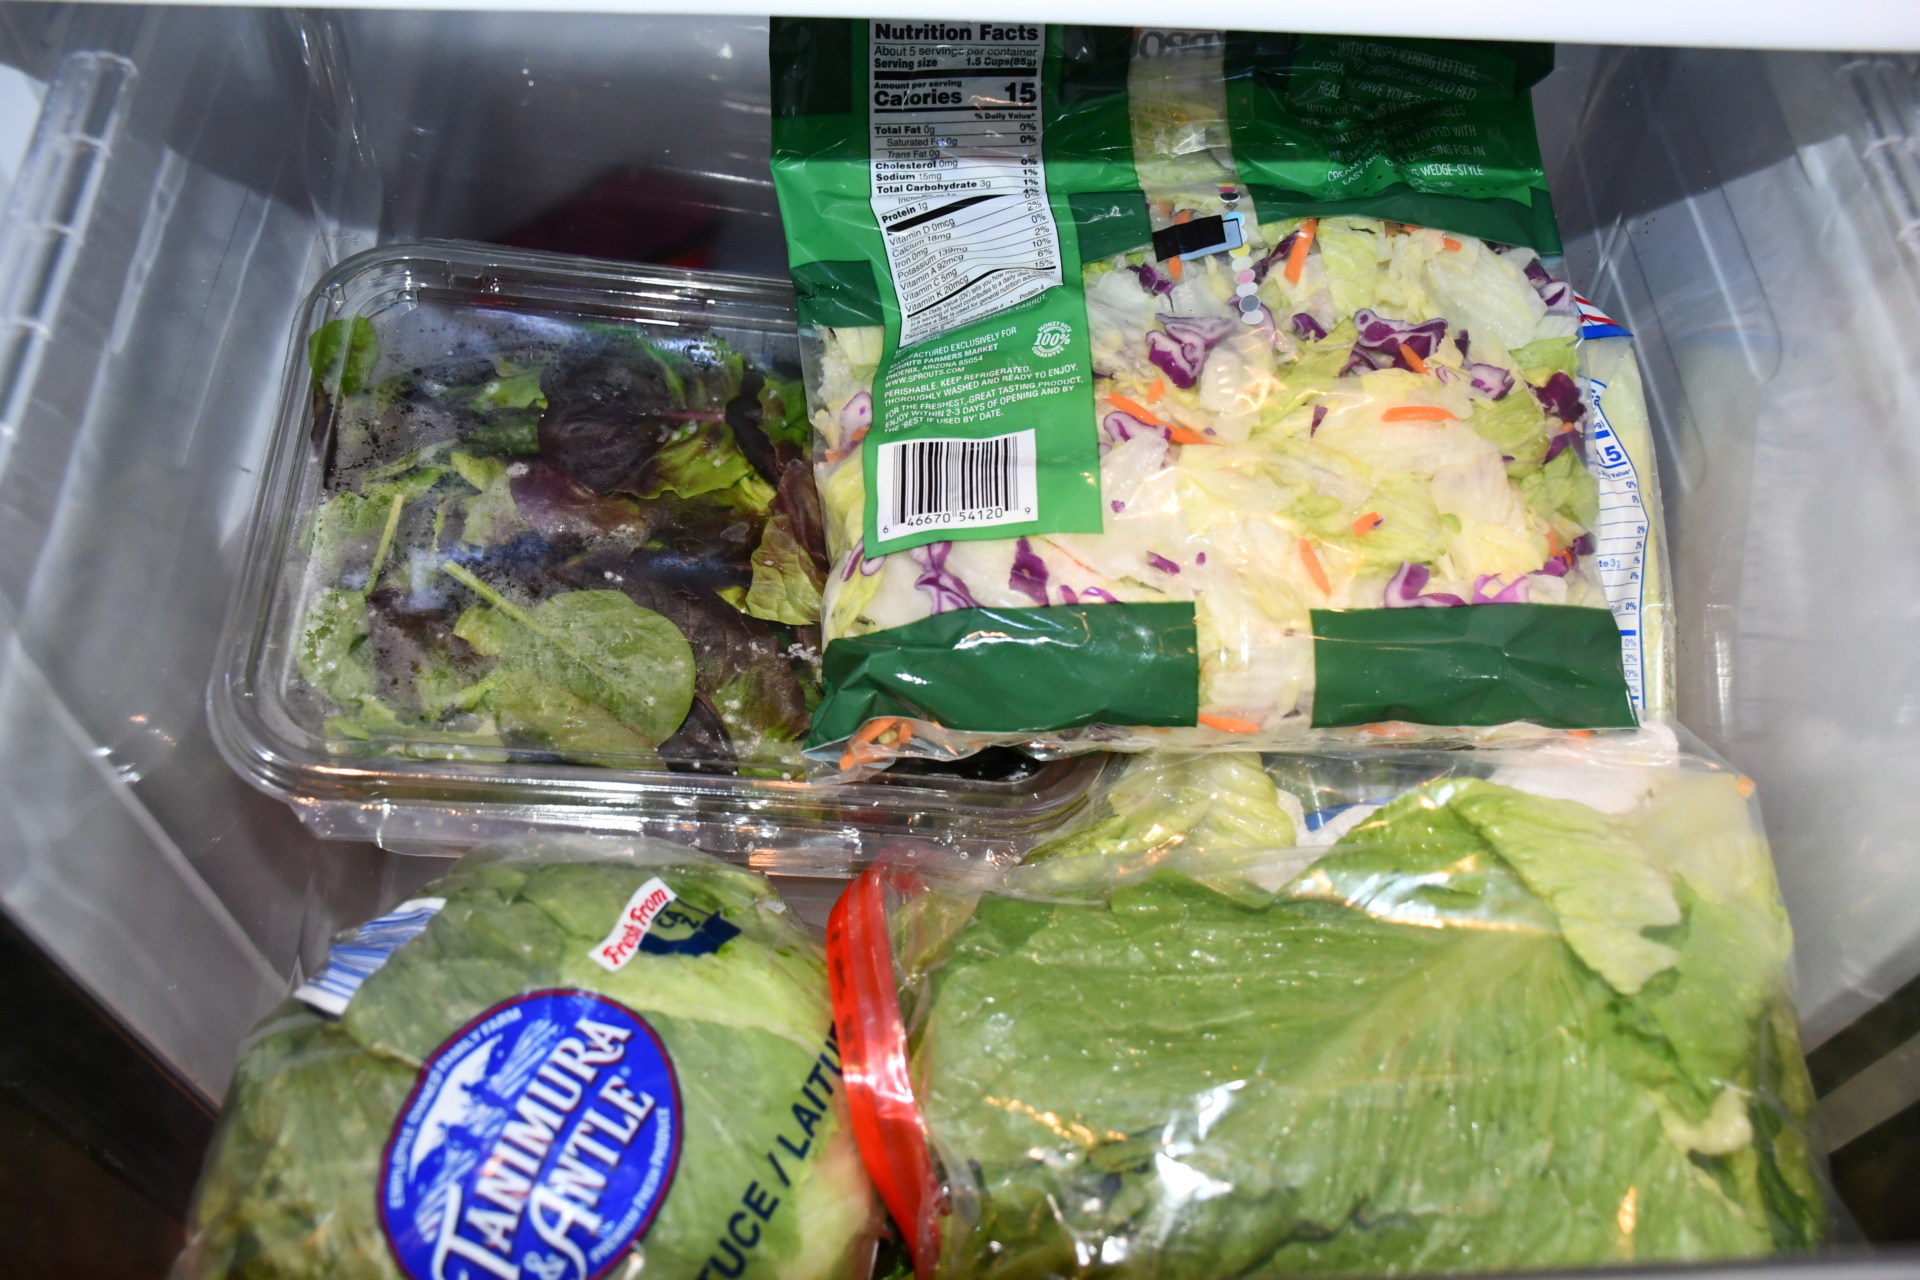 How to Store Lettuce in the Fridge (Without Plastic) - Clean Green